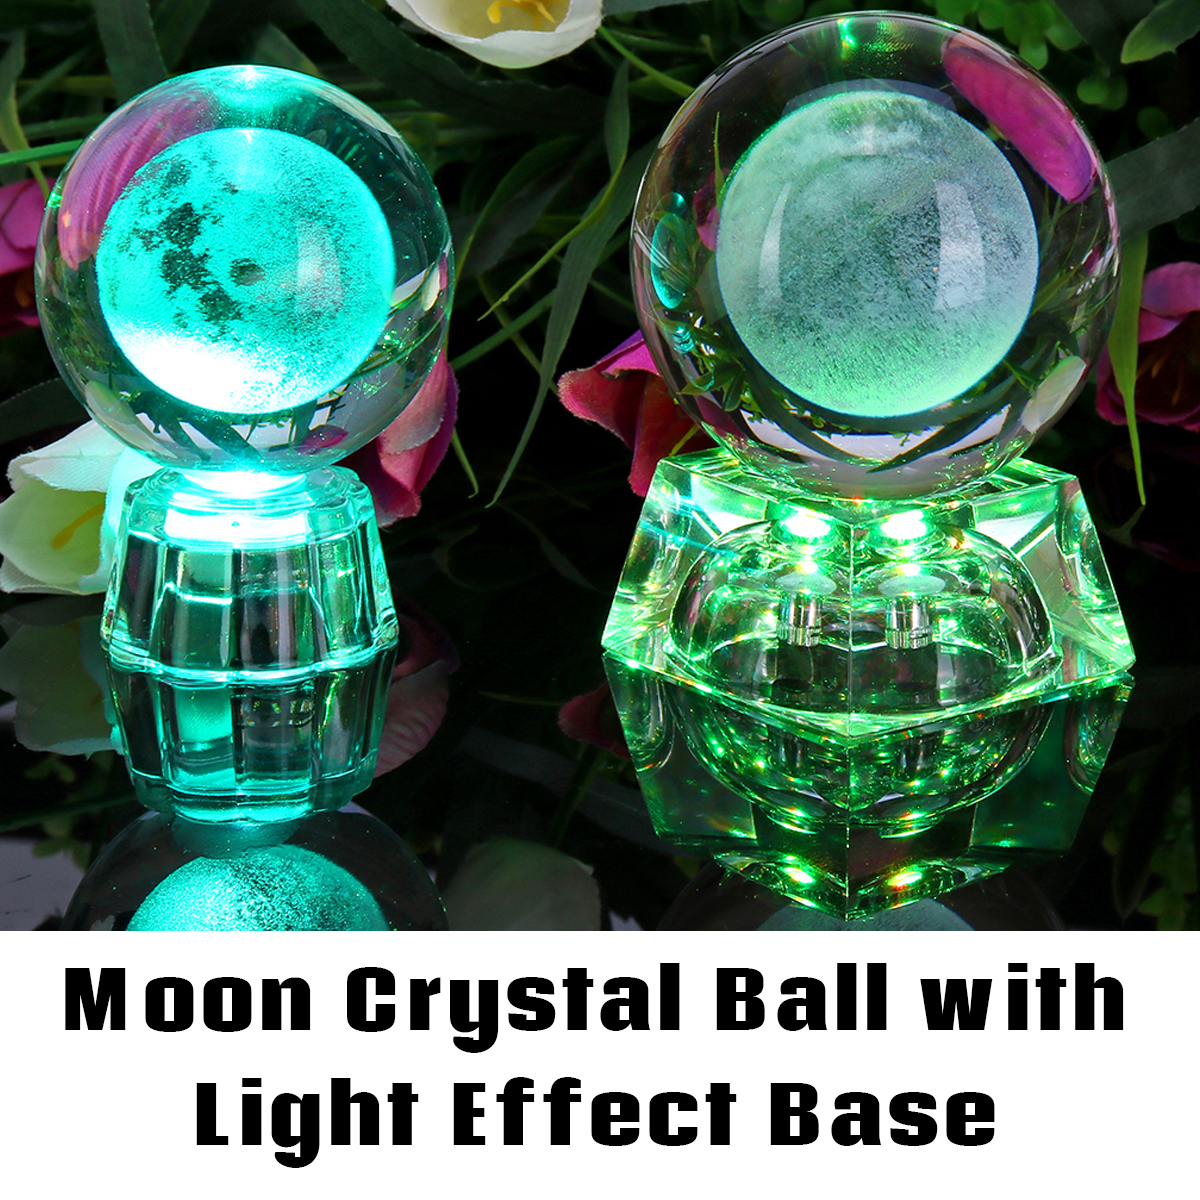 Moon-Crystal-Ball-With-Light-Effect-Base-3D-Engraving-Colorful-Ornaments-Crafts-Desktop-Decorations-1423887-1